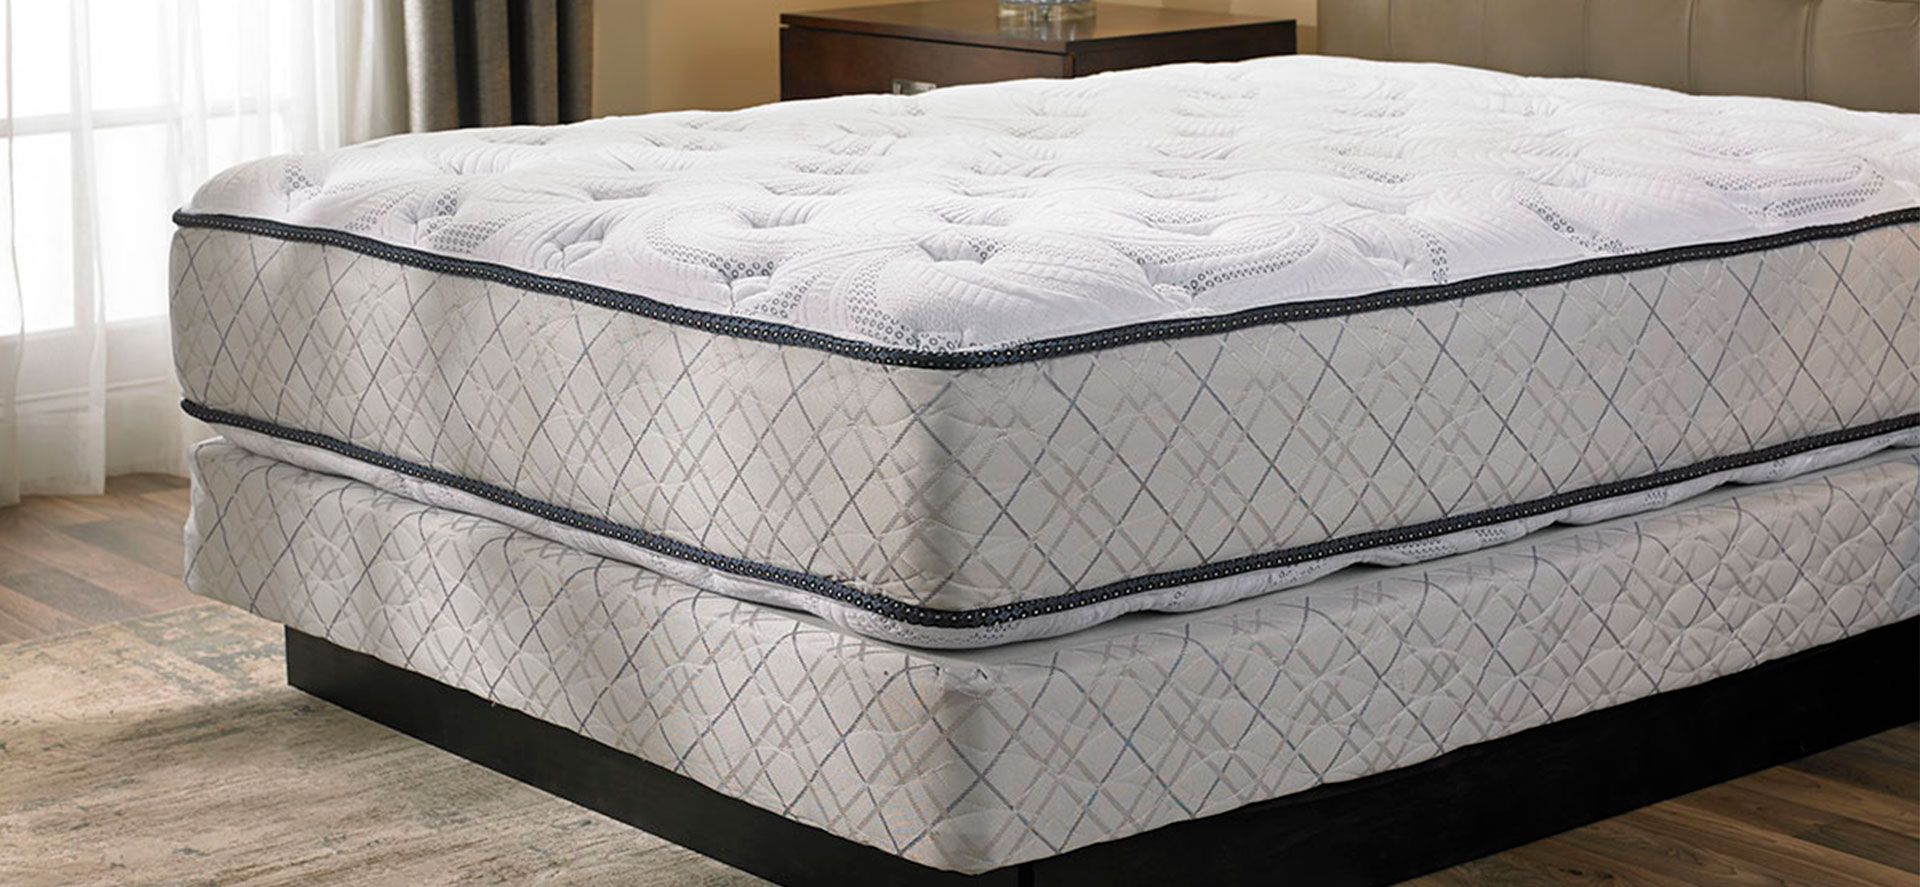 Box spring bed with mattress in the room.